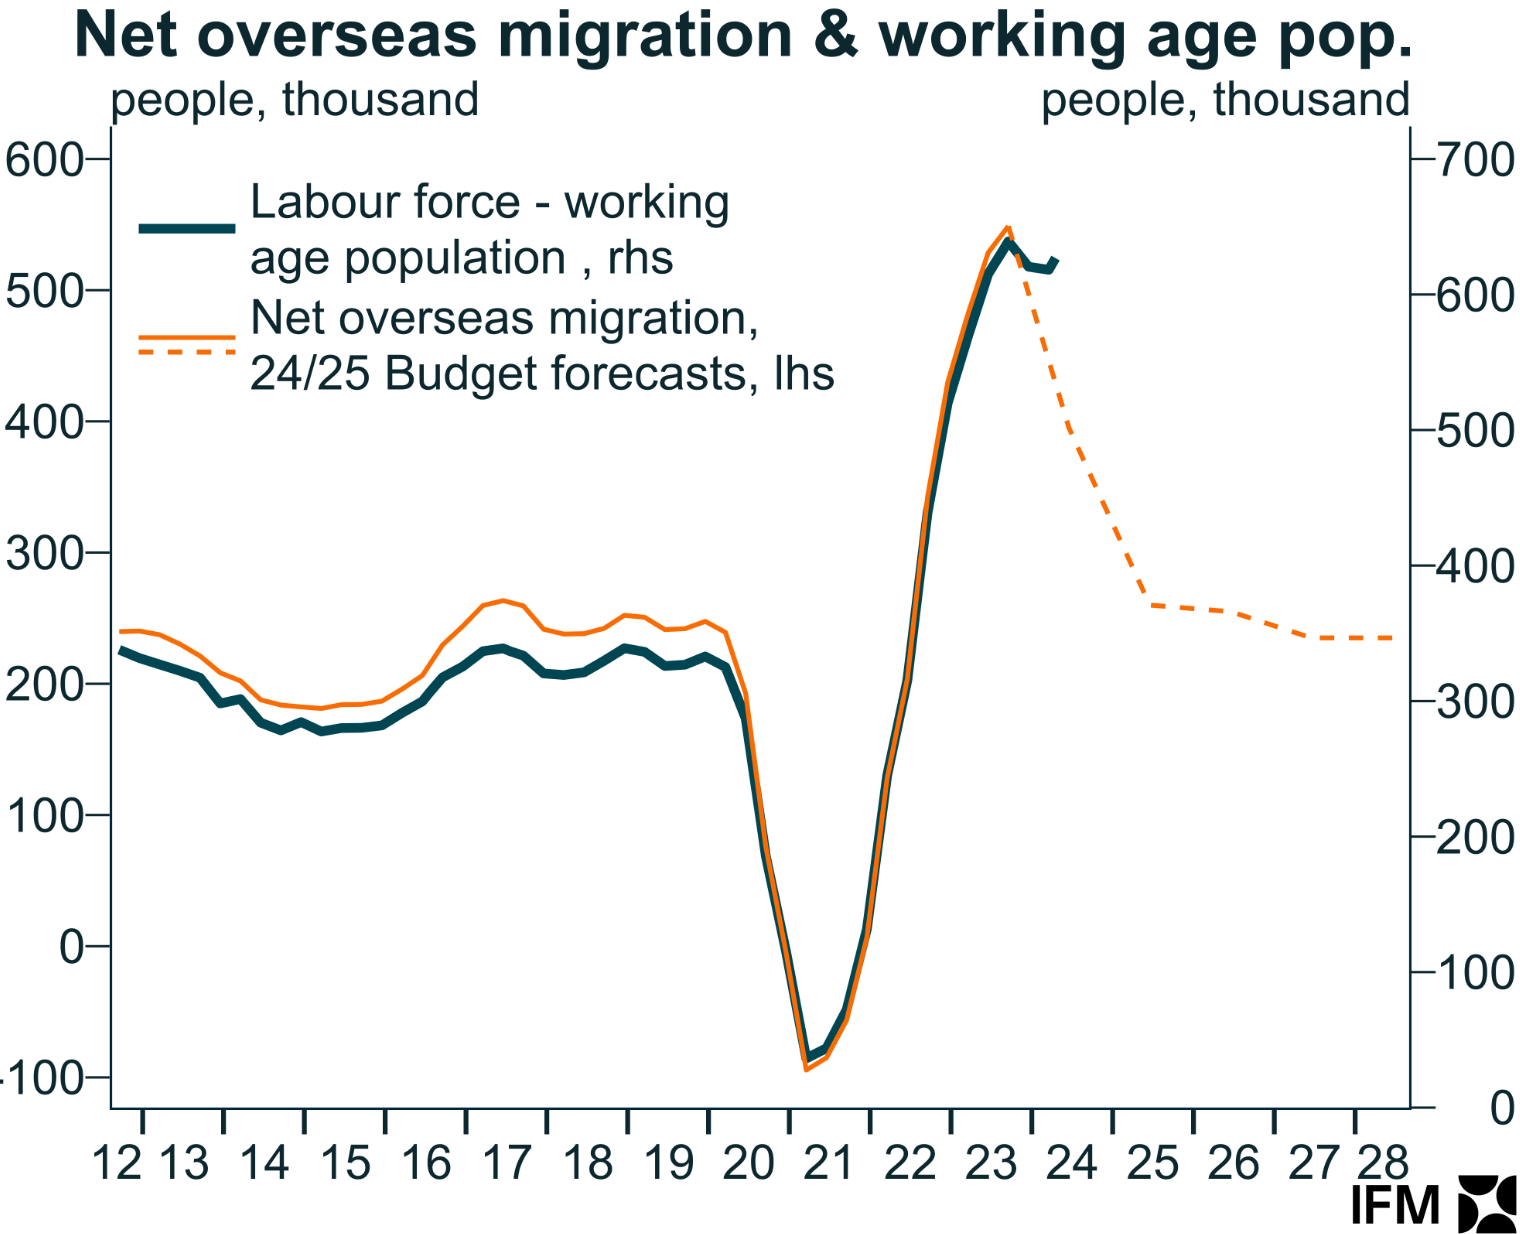 Net overseas migration and working age population